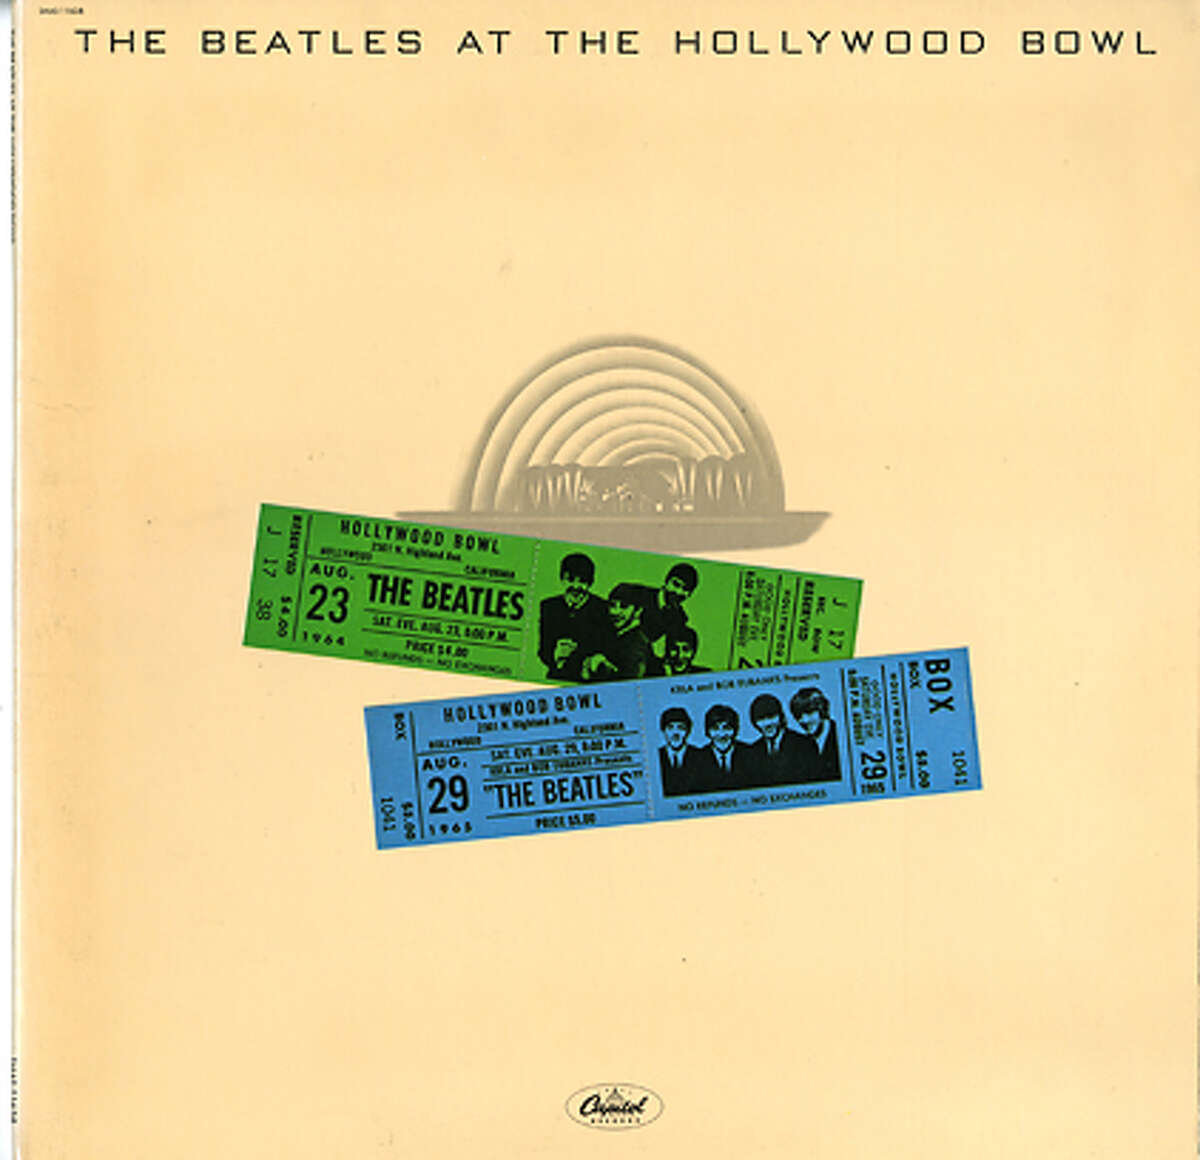 CDS31_07.JPG THE BEATLES: Live At the Hollywood Bowl catagory 1